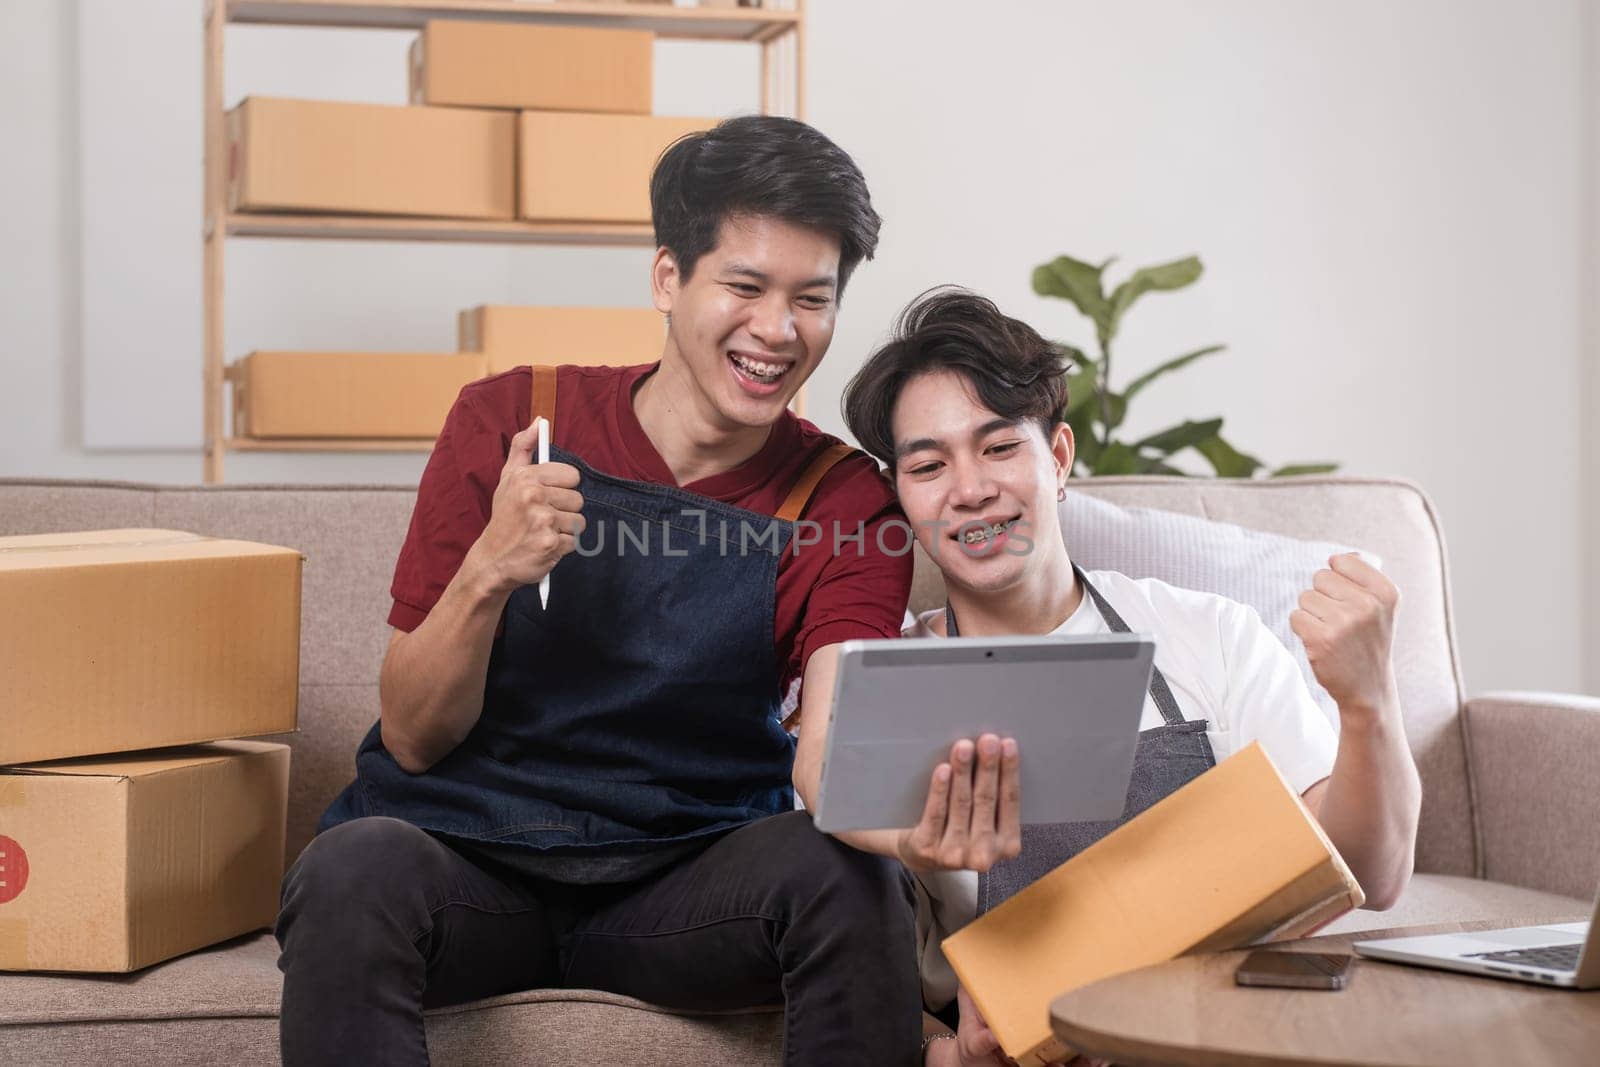 A gay couple running a small business takes order on a laptop and sells product online together in a room full of boxes. by wichayada